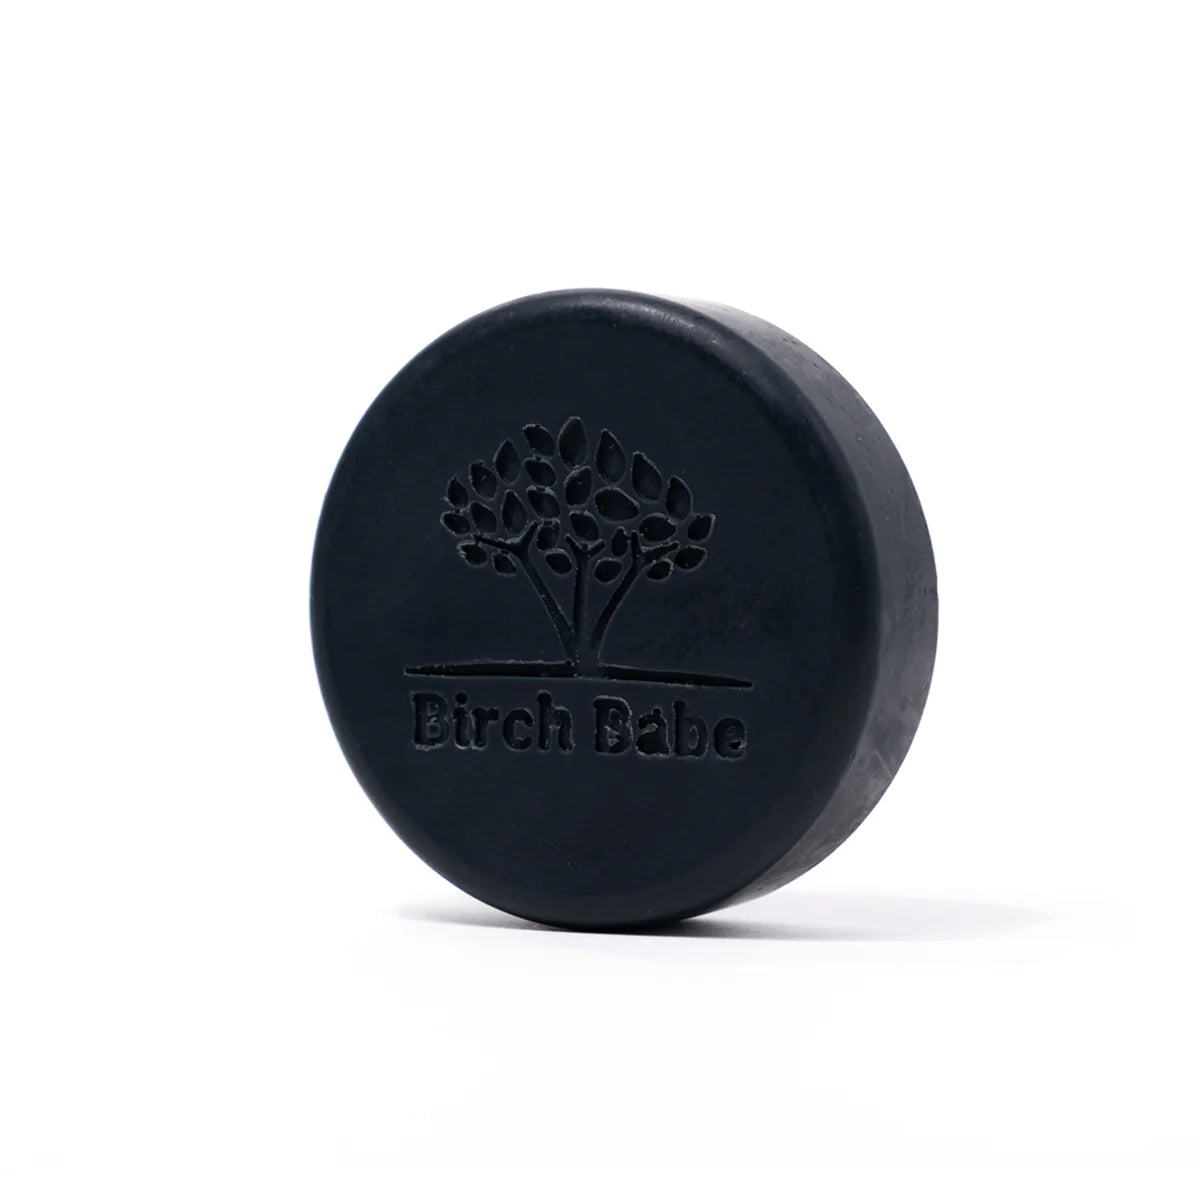 Birch Babe Facial Cleansing Bars